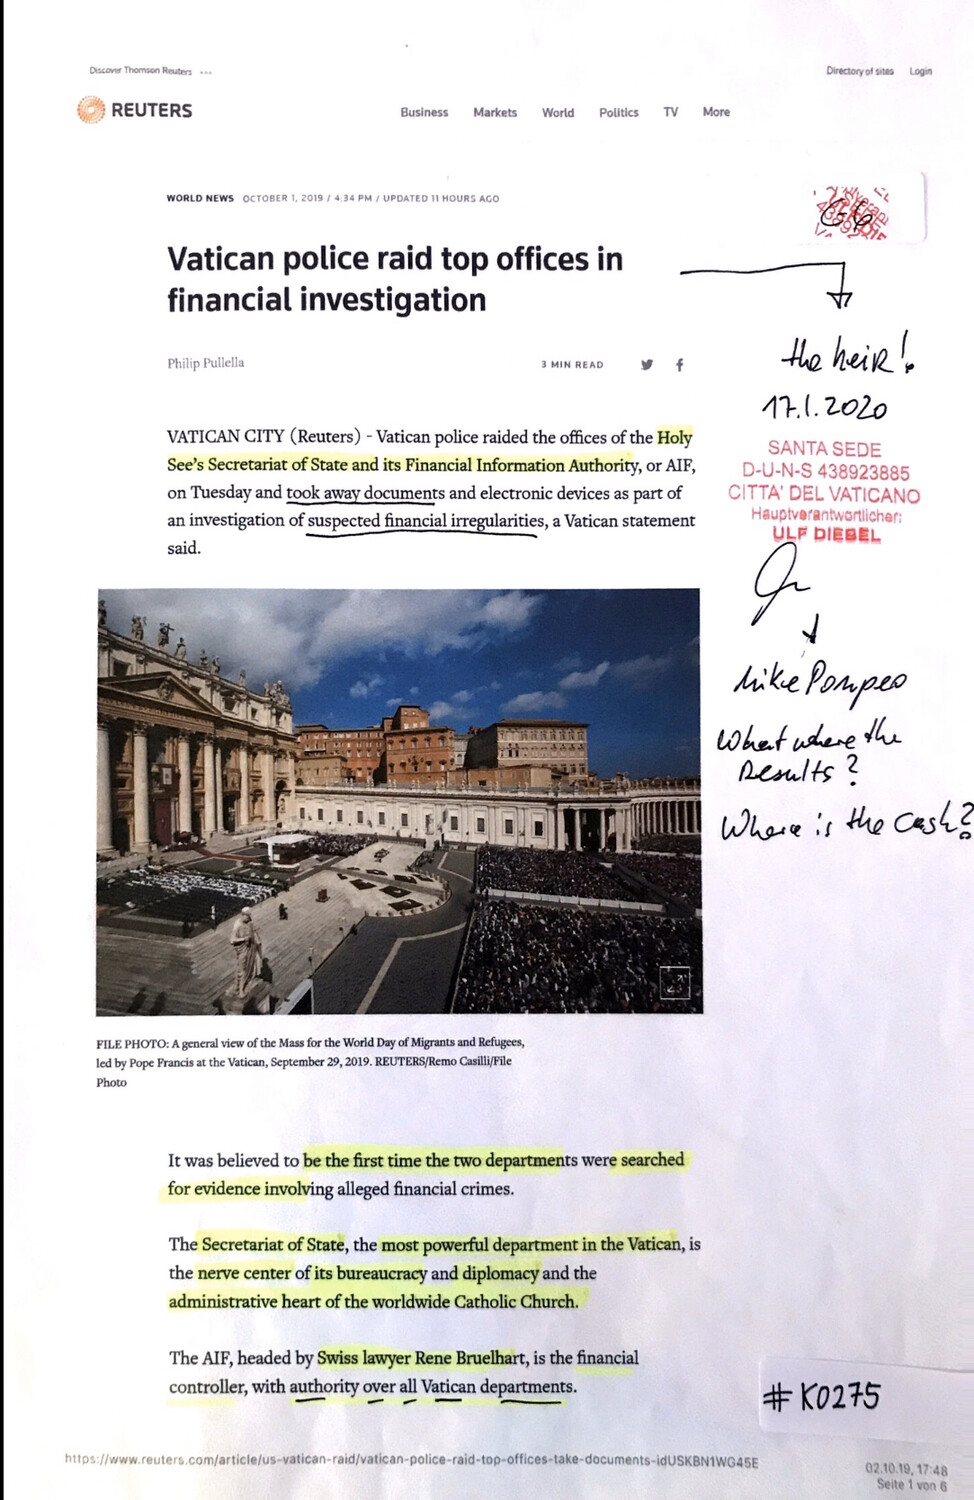 #K0275 l Reuters - Vatican police raid top offices in financial investigation